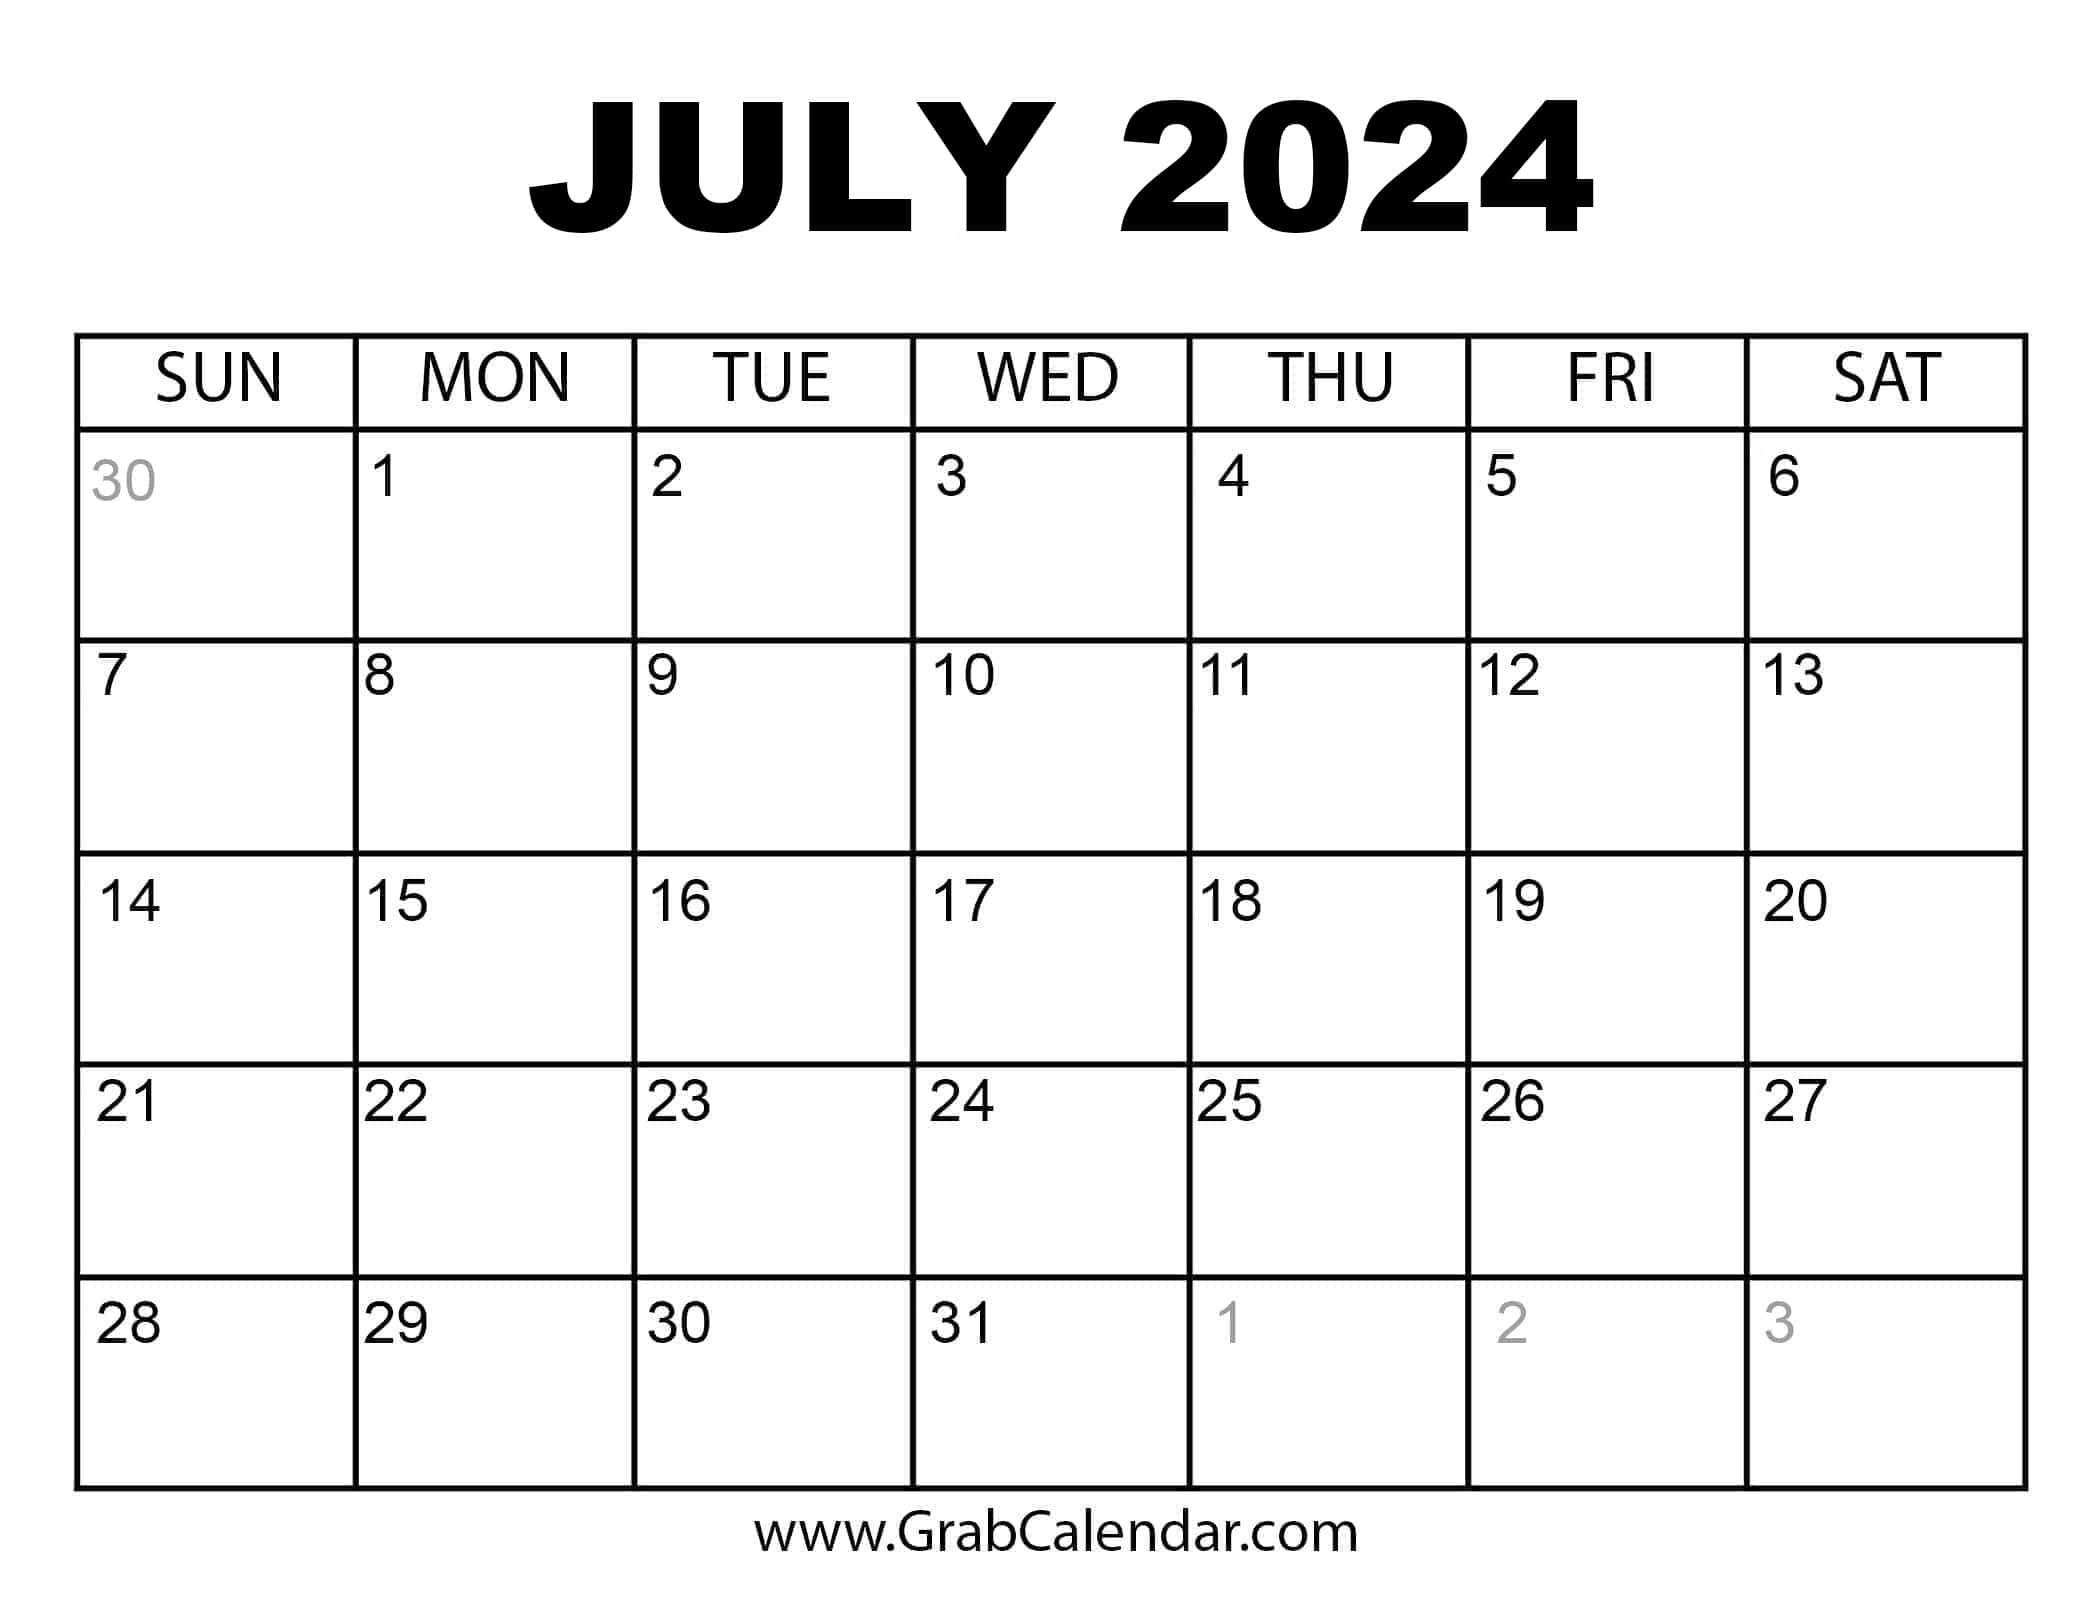 Printable July 2024 Calendar intended for Calendar Page For July 2024